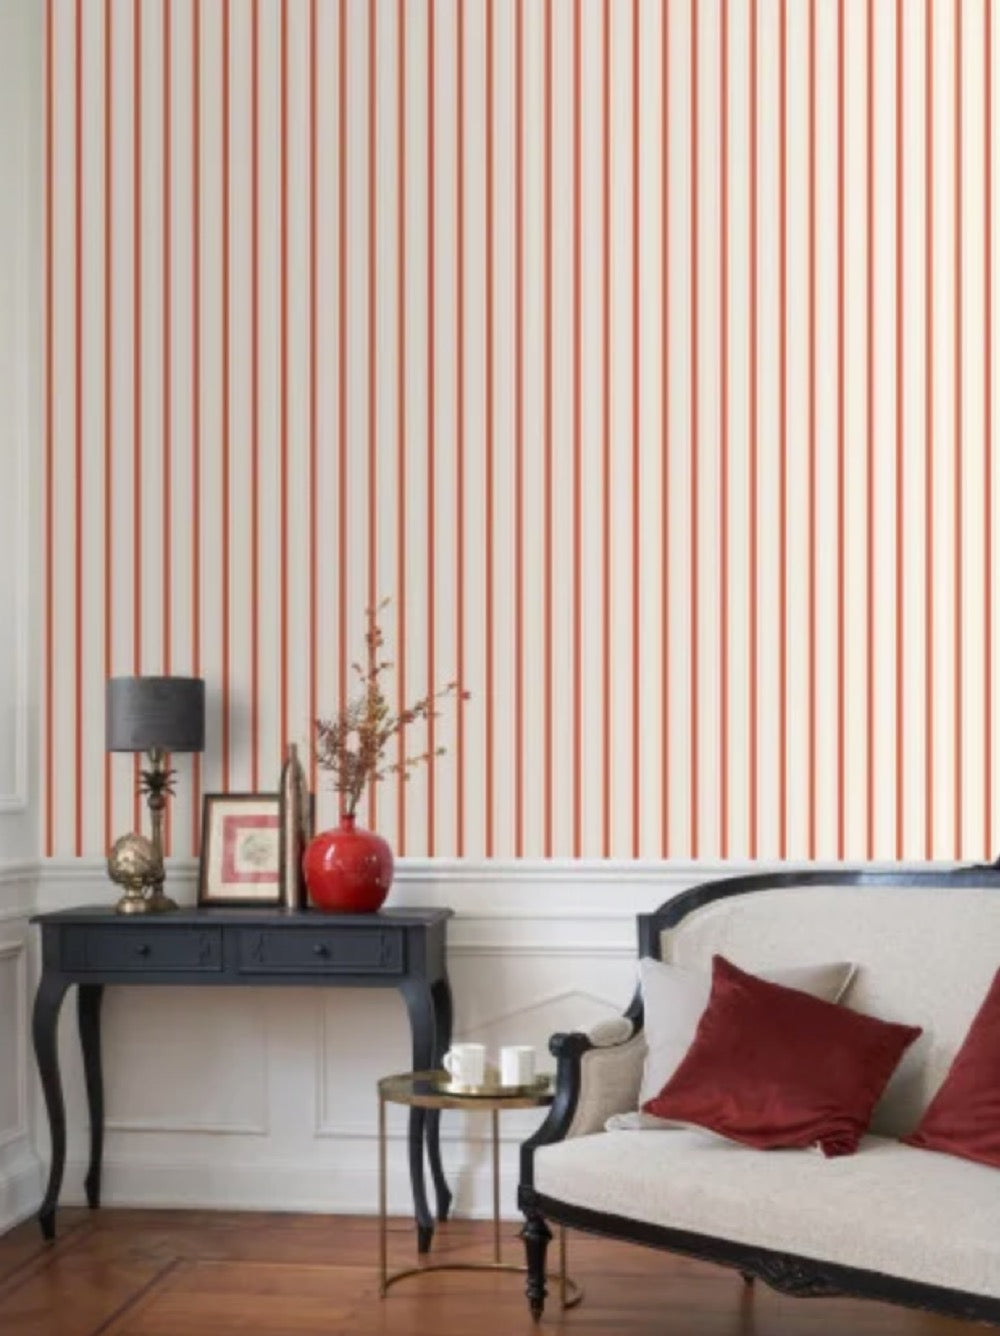 NT81578225cd Fabulous and timeless stripe on paste the wall designer wallpaper. ***PLEASE NOTE: This wallpaper is a special order product and therefore delivery will take approx. 10 working days.